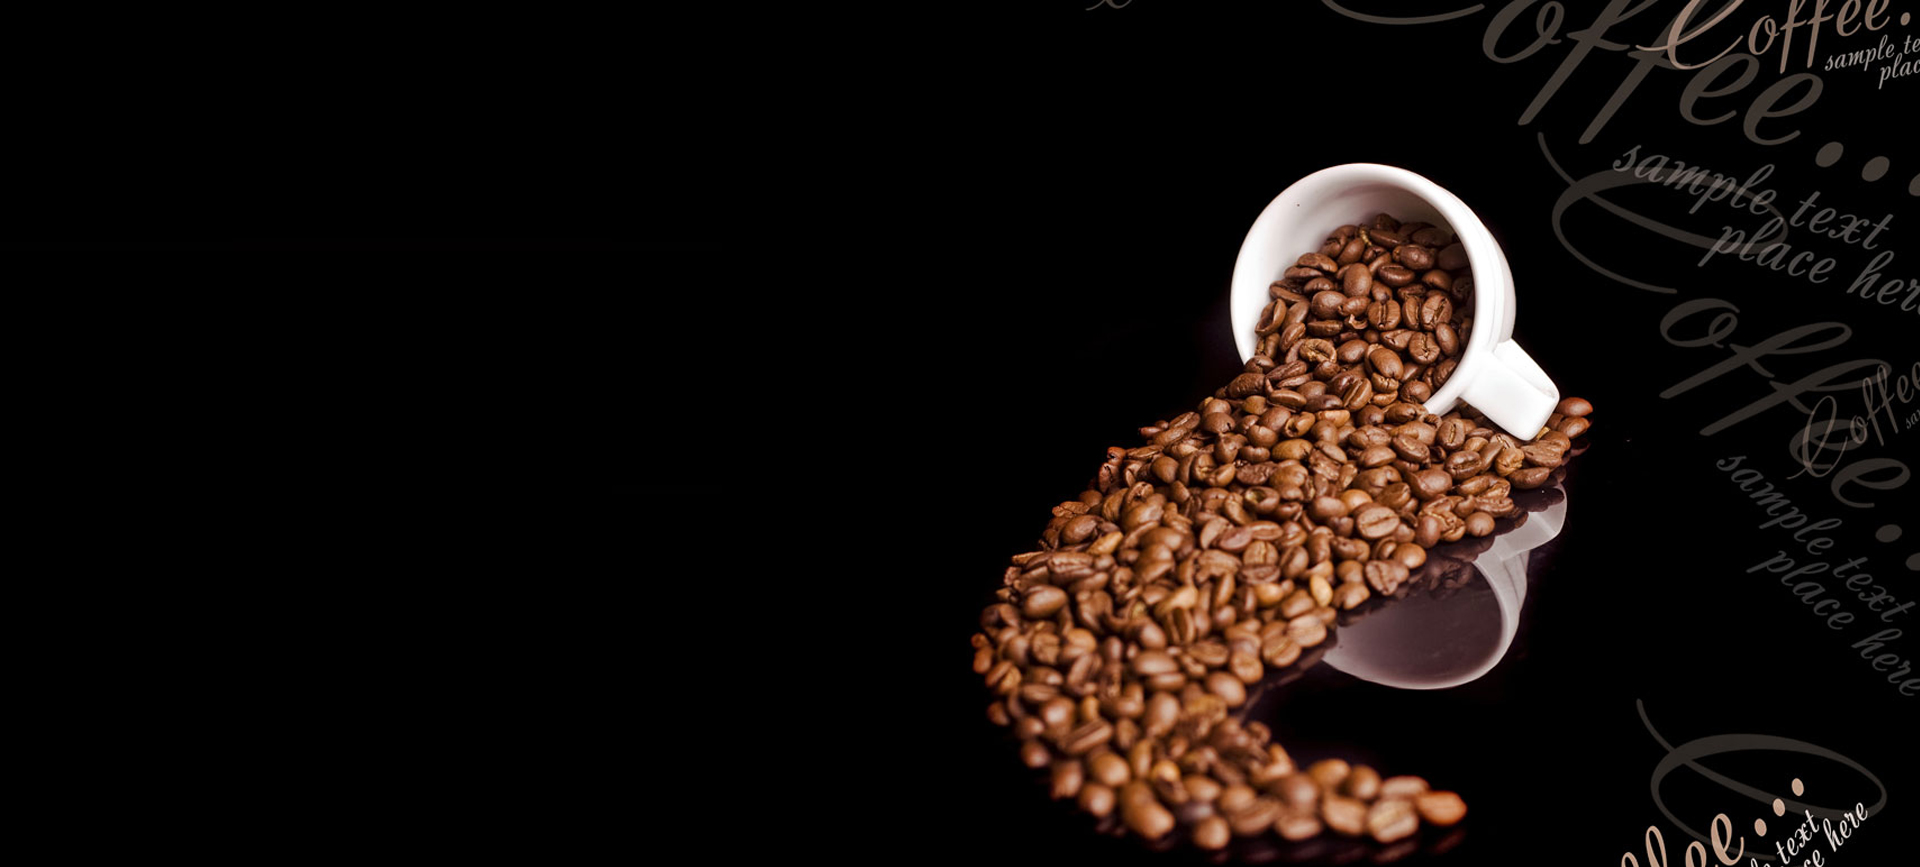 Yunnan Enterprises to build Asia's largest Coffee Base in Laos